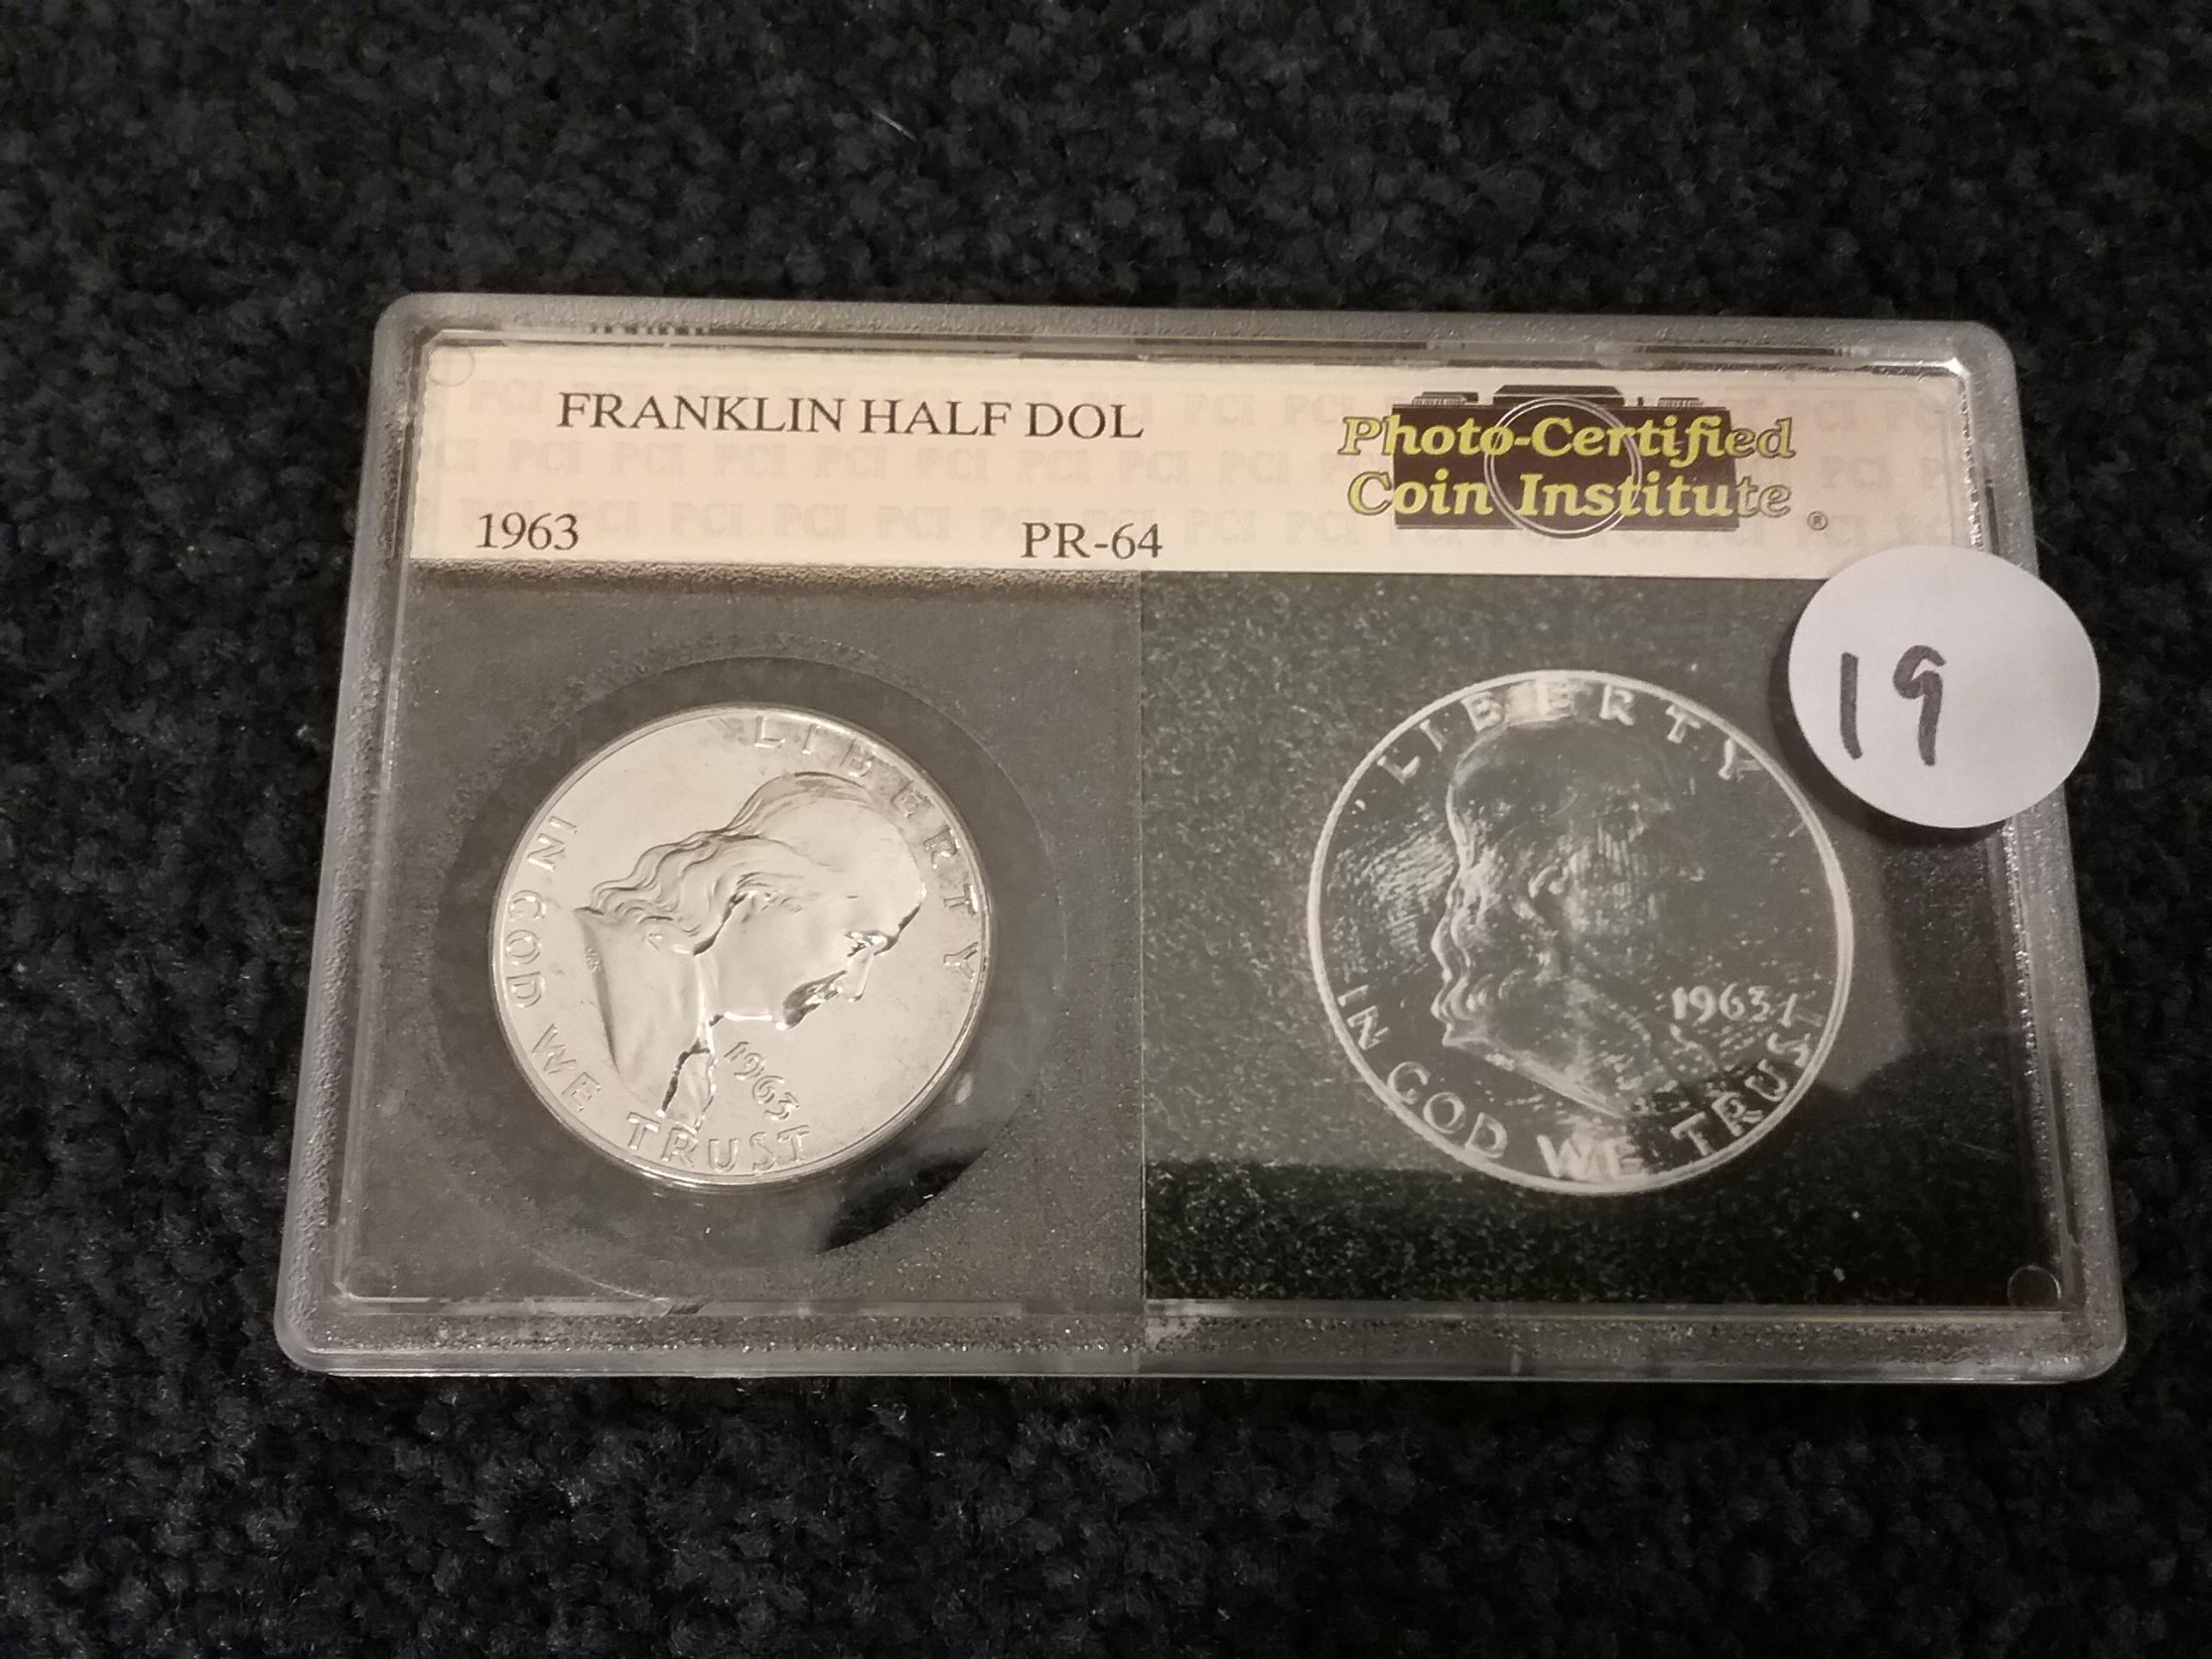 Photo-Certified Coin Institute Franklin Half-Dollar Proof